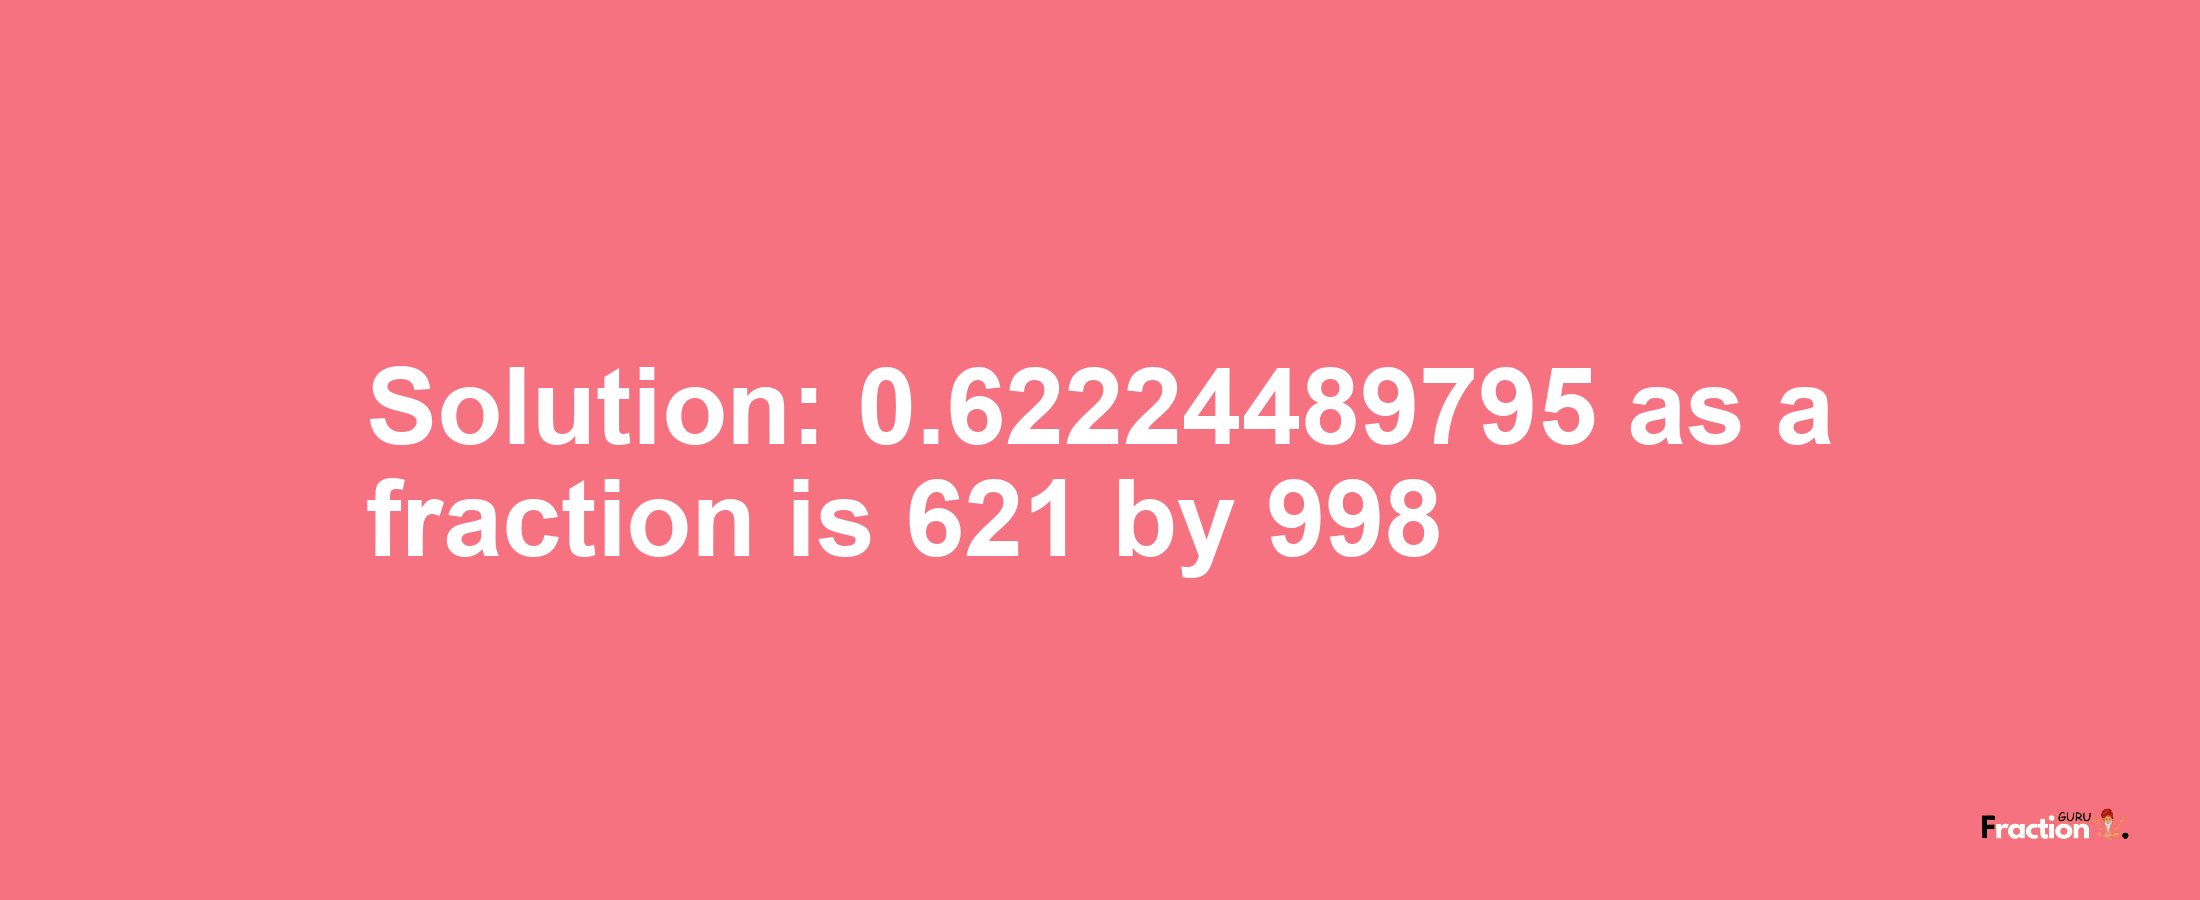 Solution:0.62224489795 as a fraction is 621/998